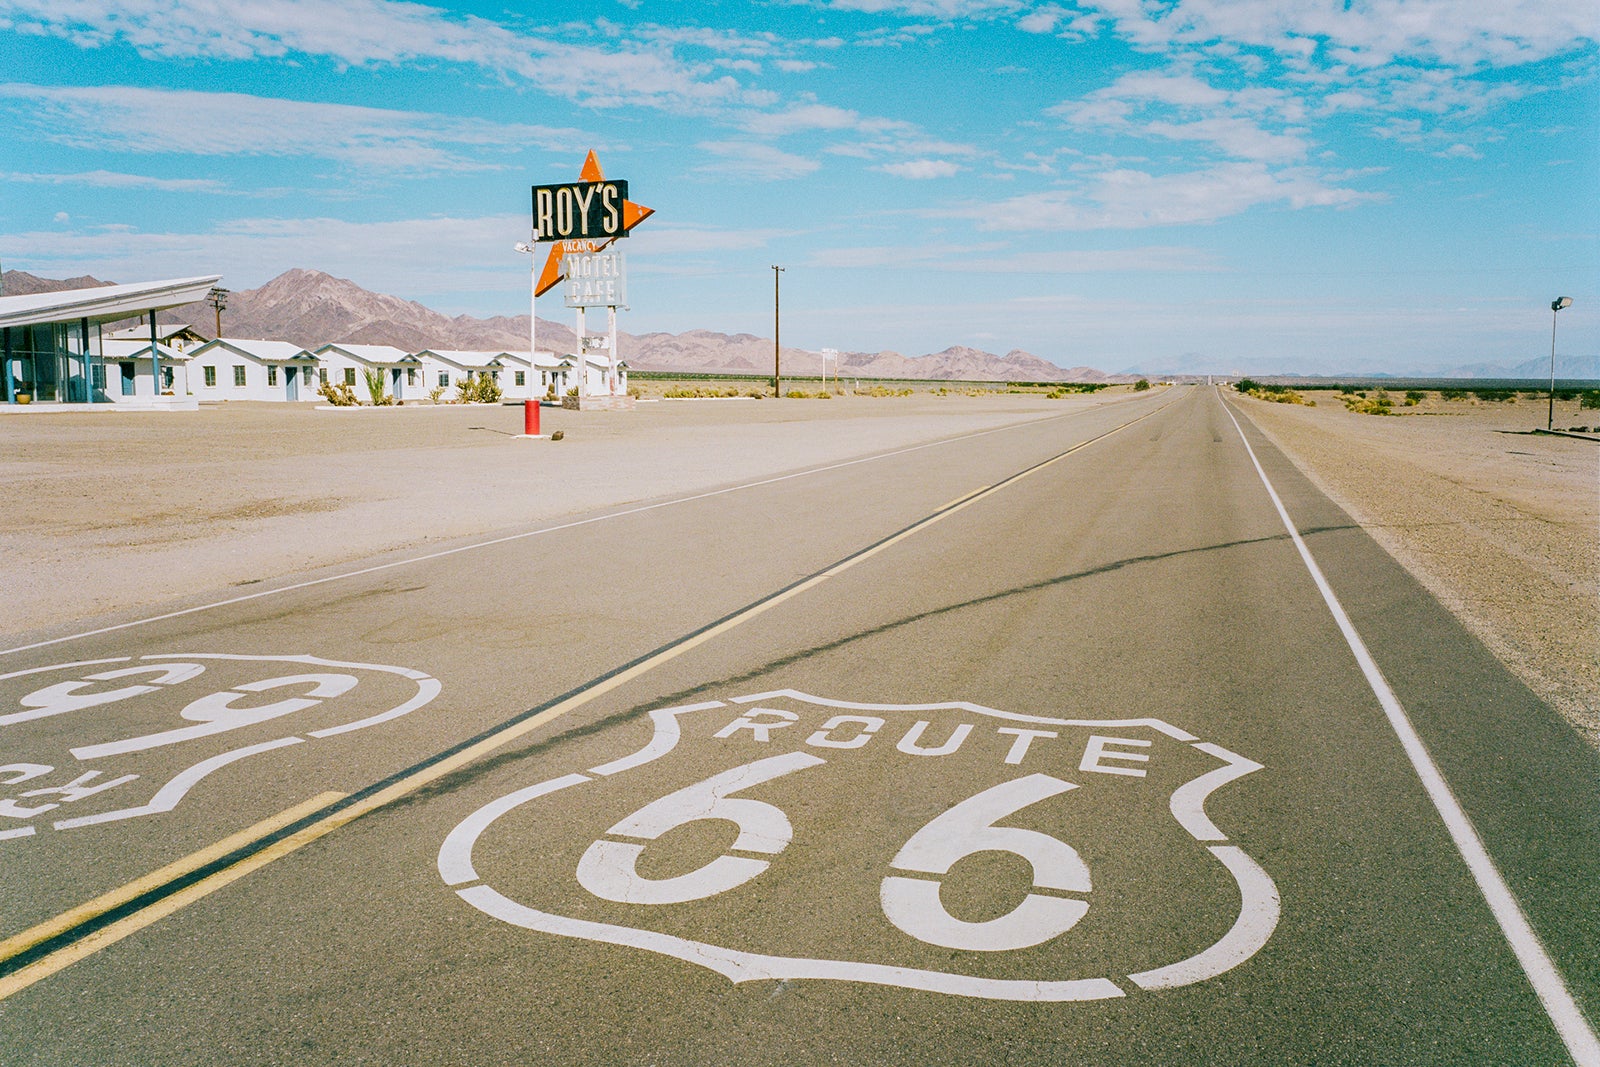 Roue 66 sign in road  by a Diner in the desert